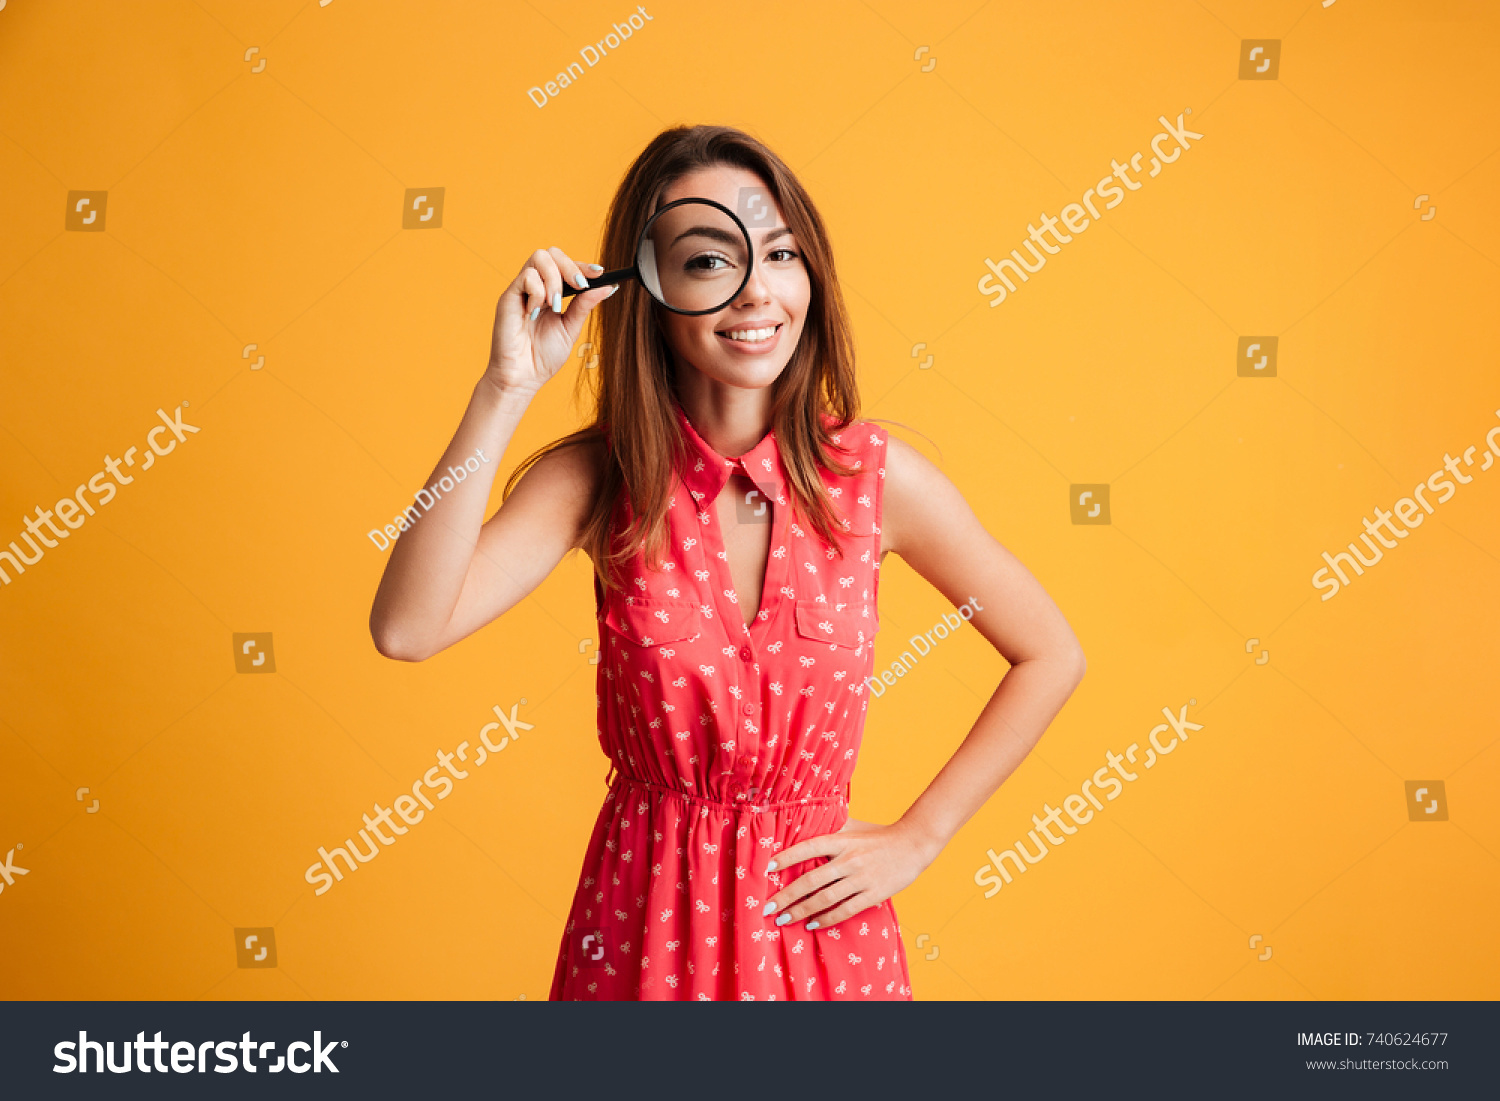 Close-up portrait of cheerful pretty woman in red dress looking at camera through magnifying glass, isolated over yellow background #740624677